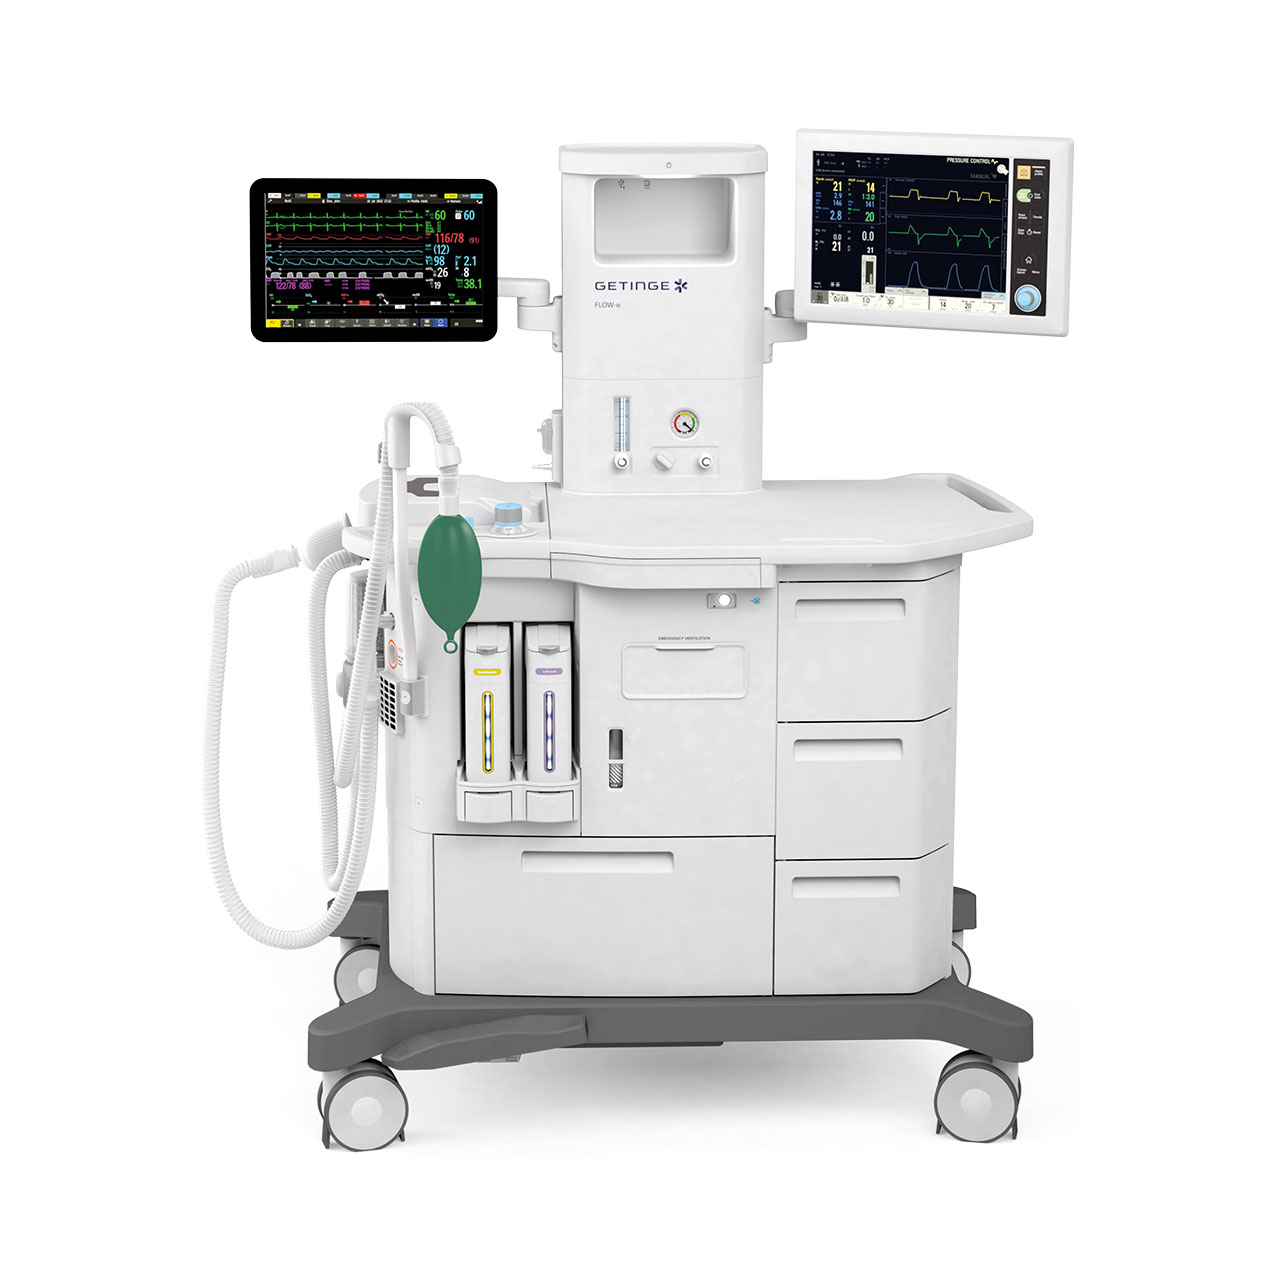 Flow-e is Getinge's extended anesthesia machine that ensures efficient ventilation performance and personalized care in the OR.